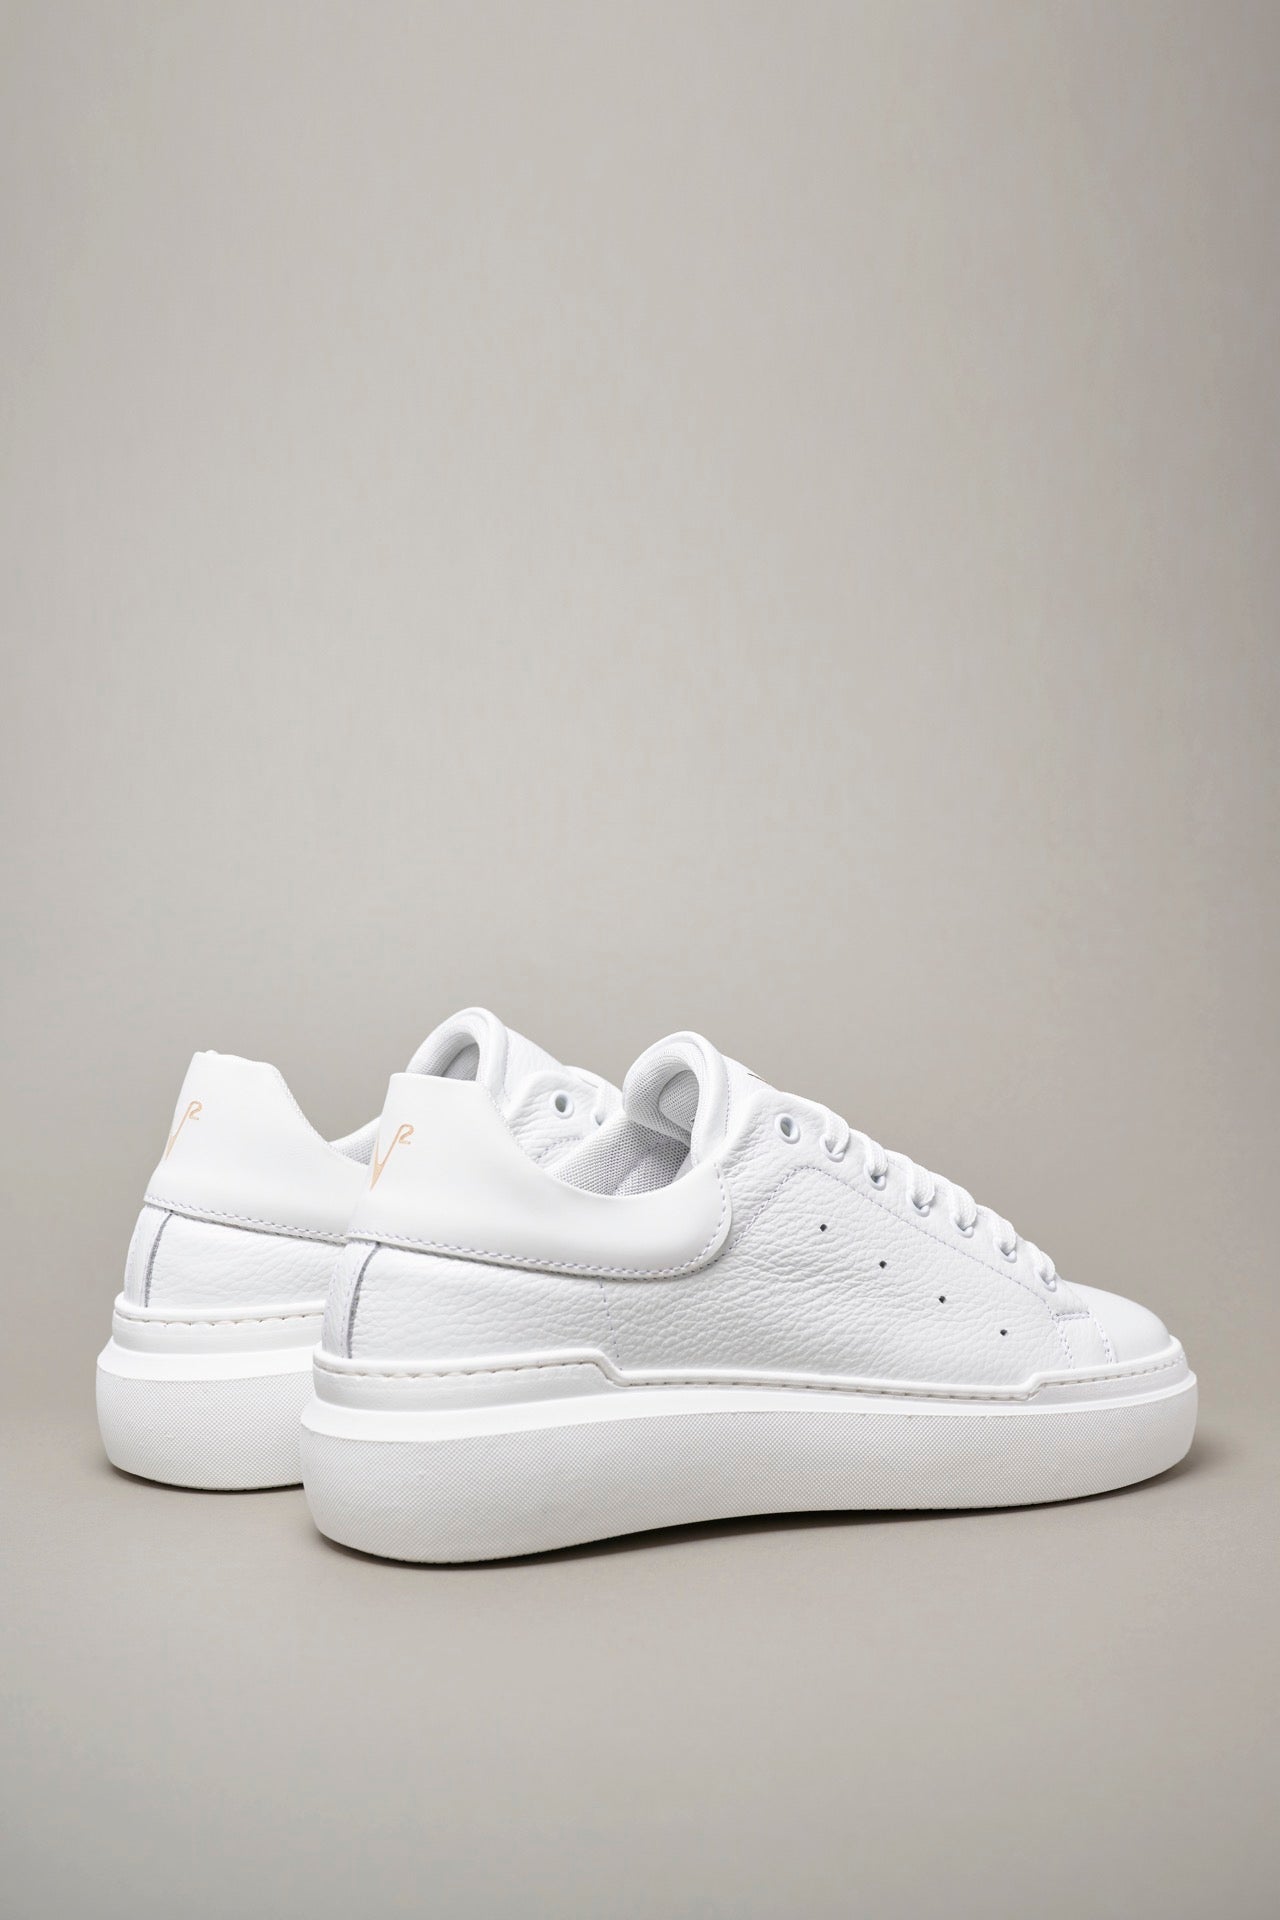 HAMMER - High sole sneakers in textured leather with White back